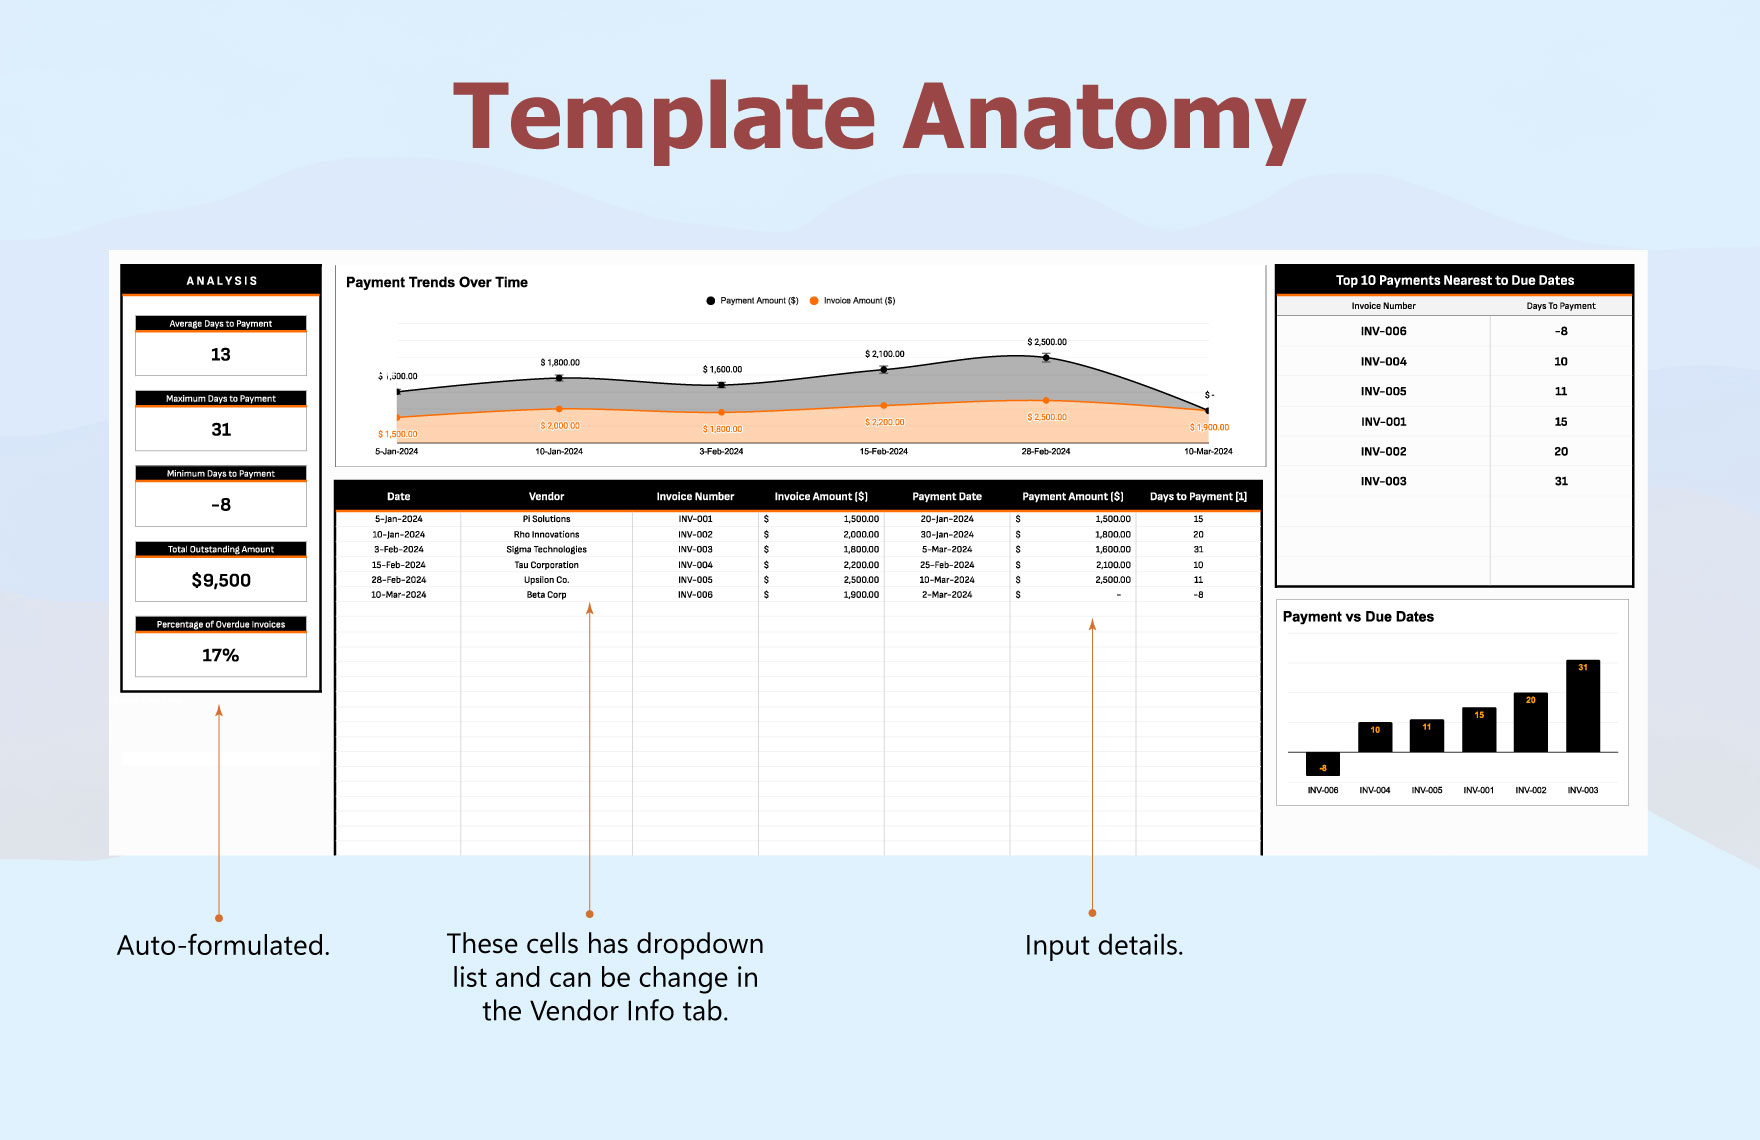 Finance Invoice Payment Timeline Analysis Template